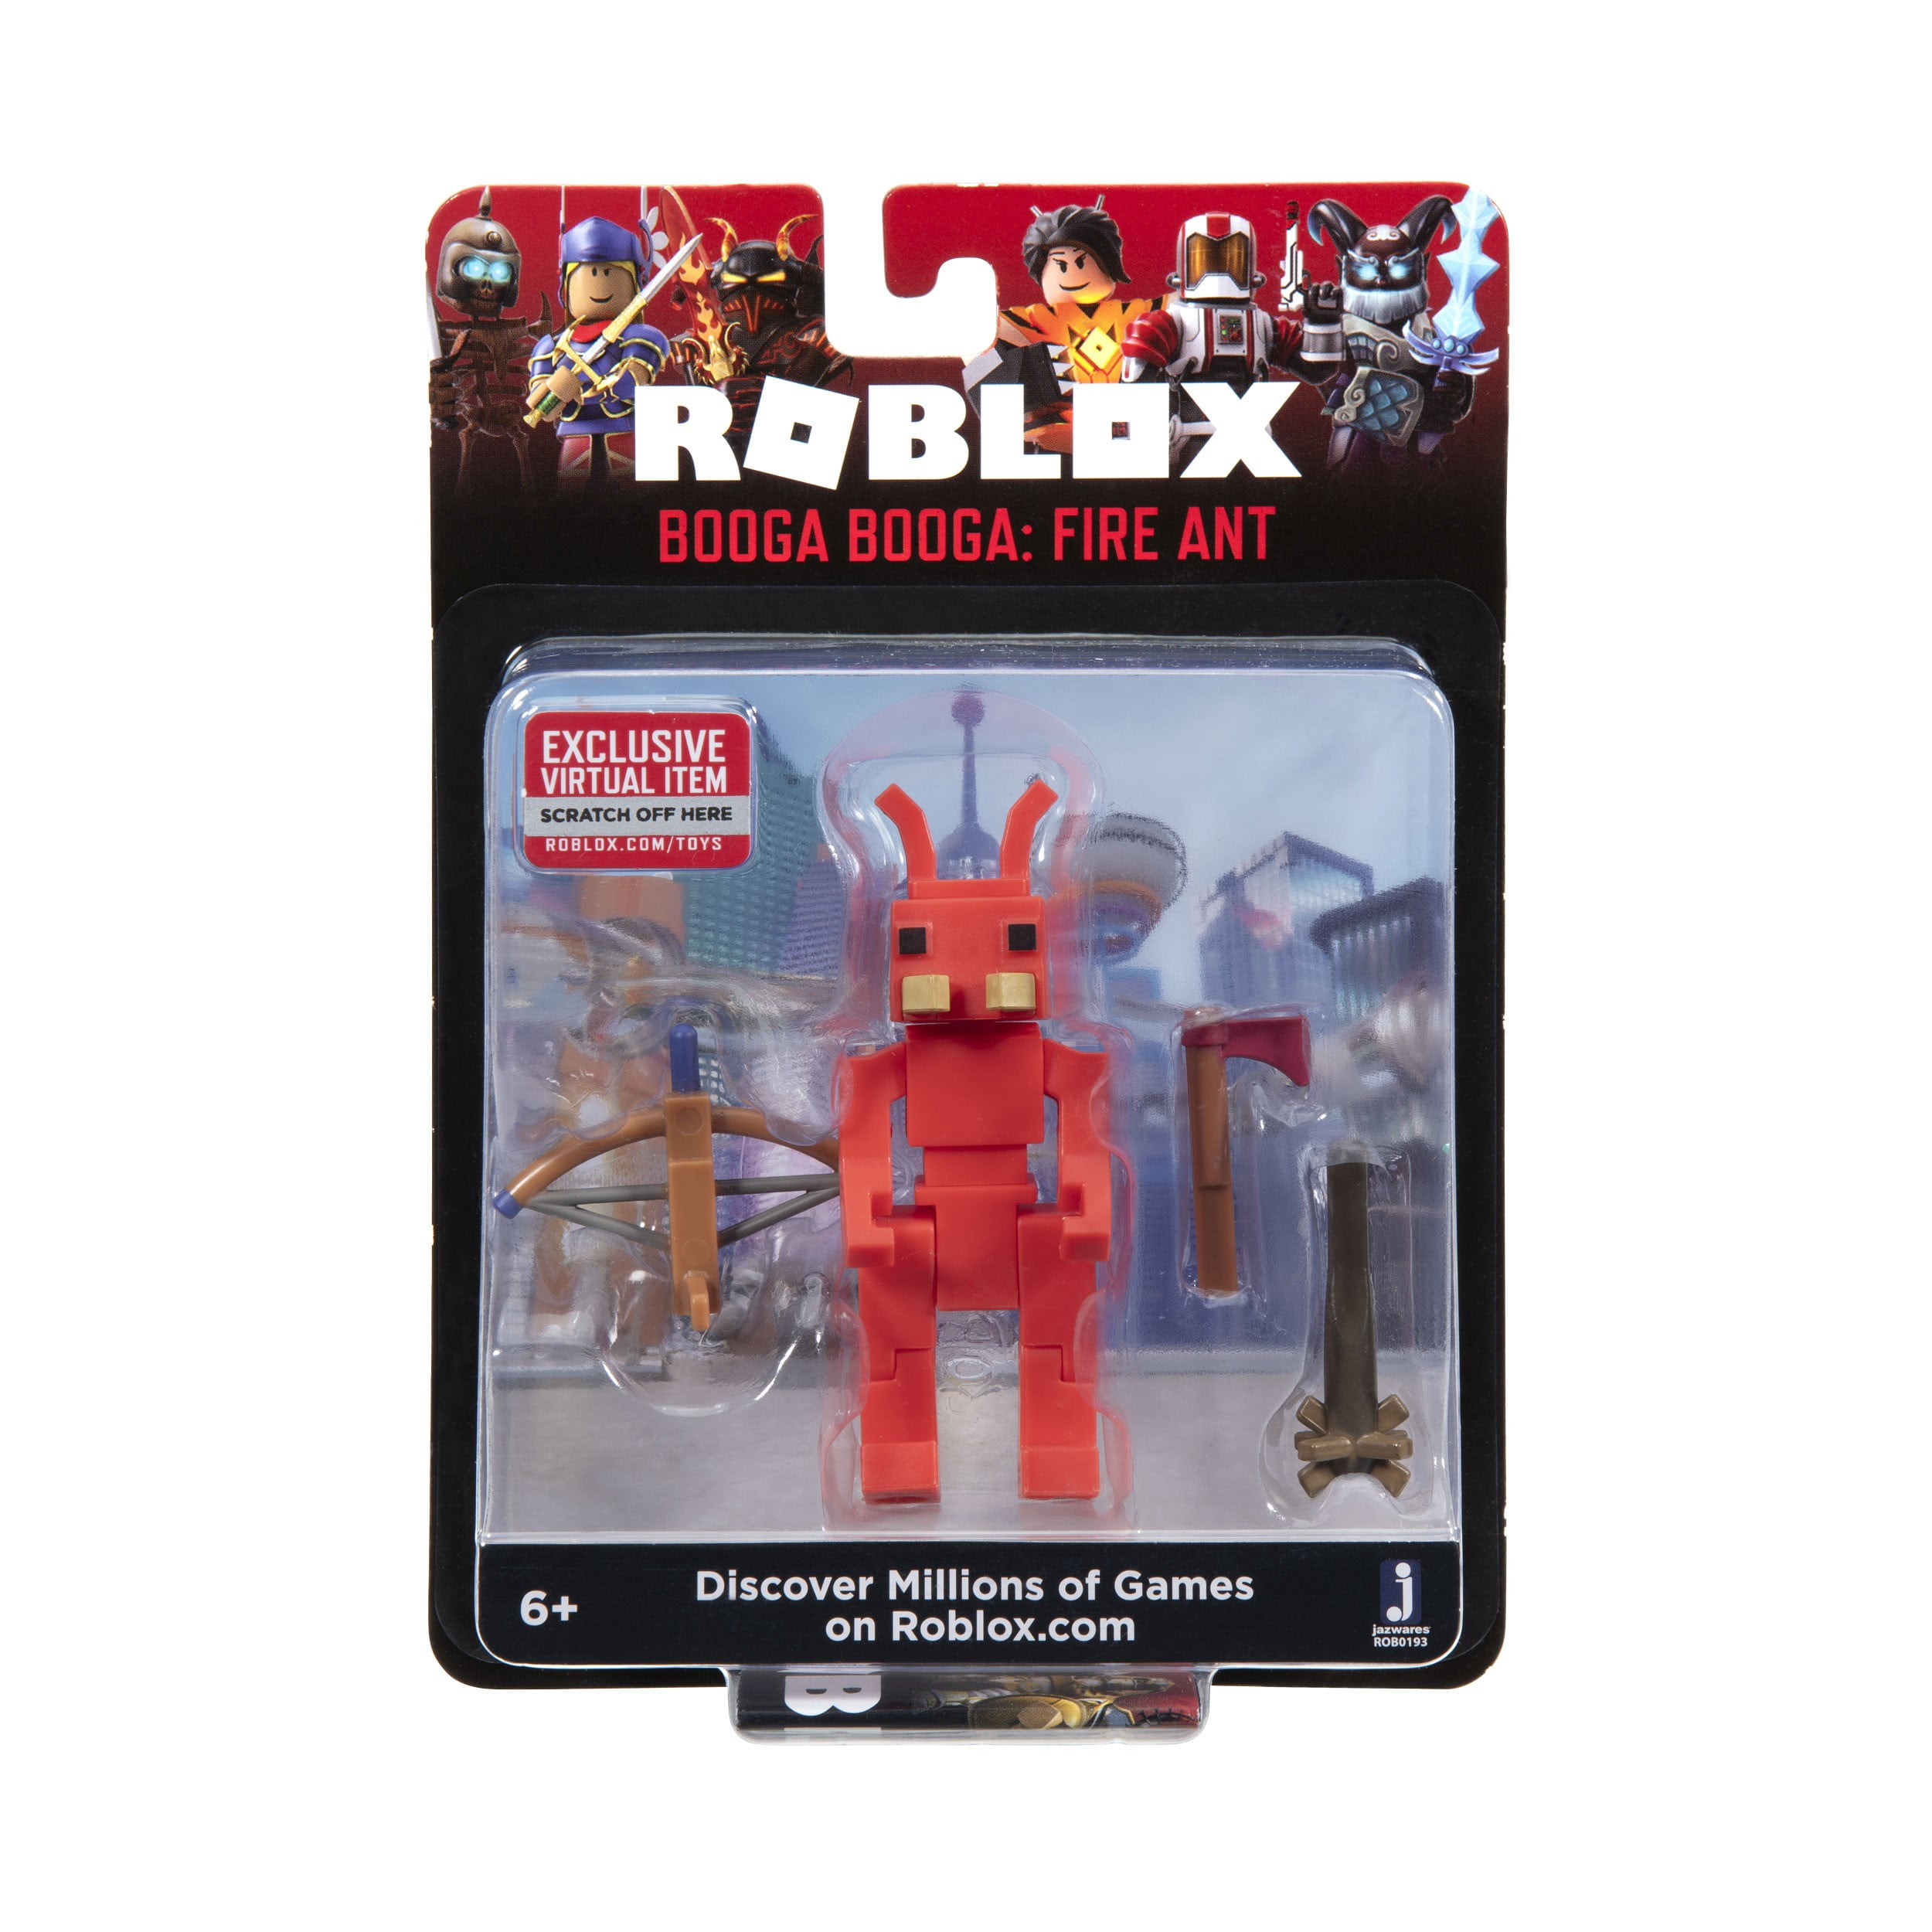 Roblox Action Collection Booga Booga Fire Ant Figure Pack Includes Exclusive Virtual Item Walmart Com Walmart Com - roblox booga booga fire ant single